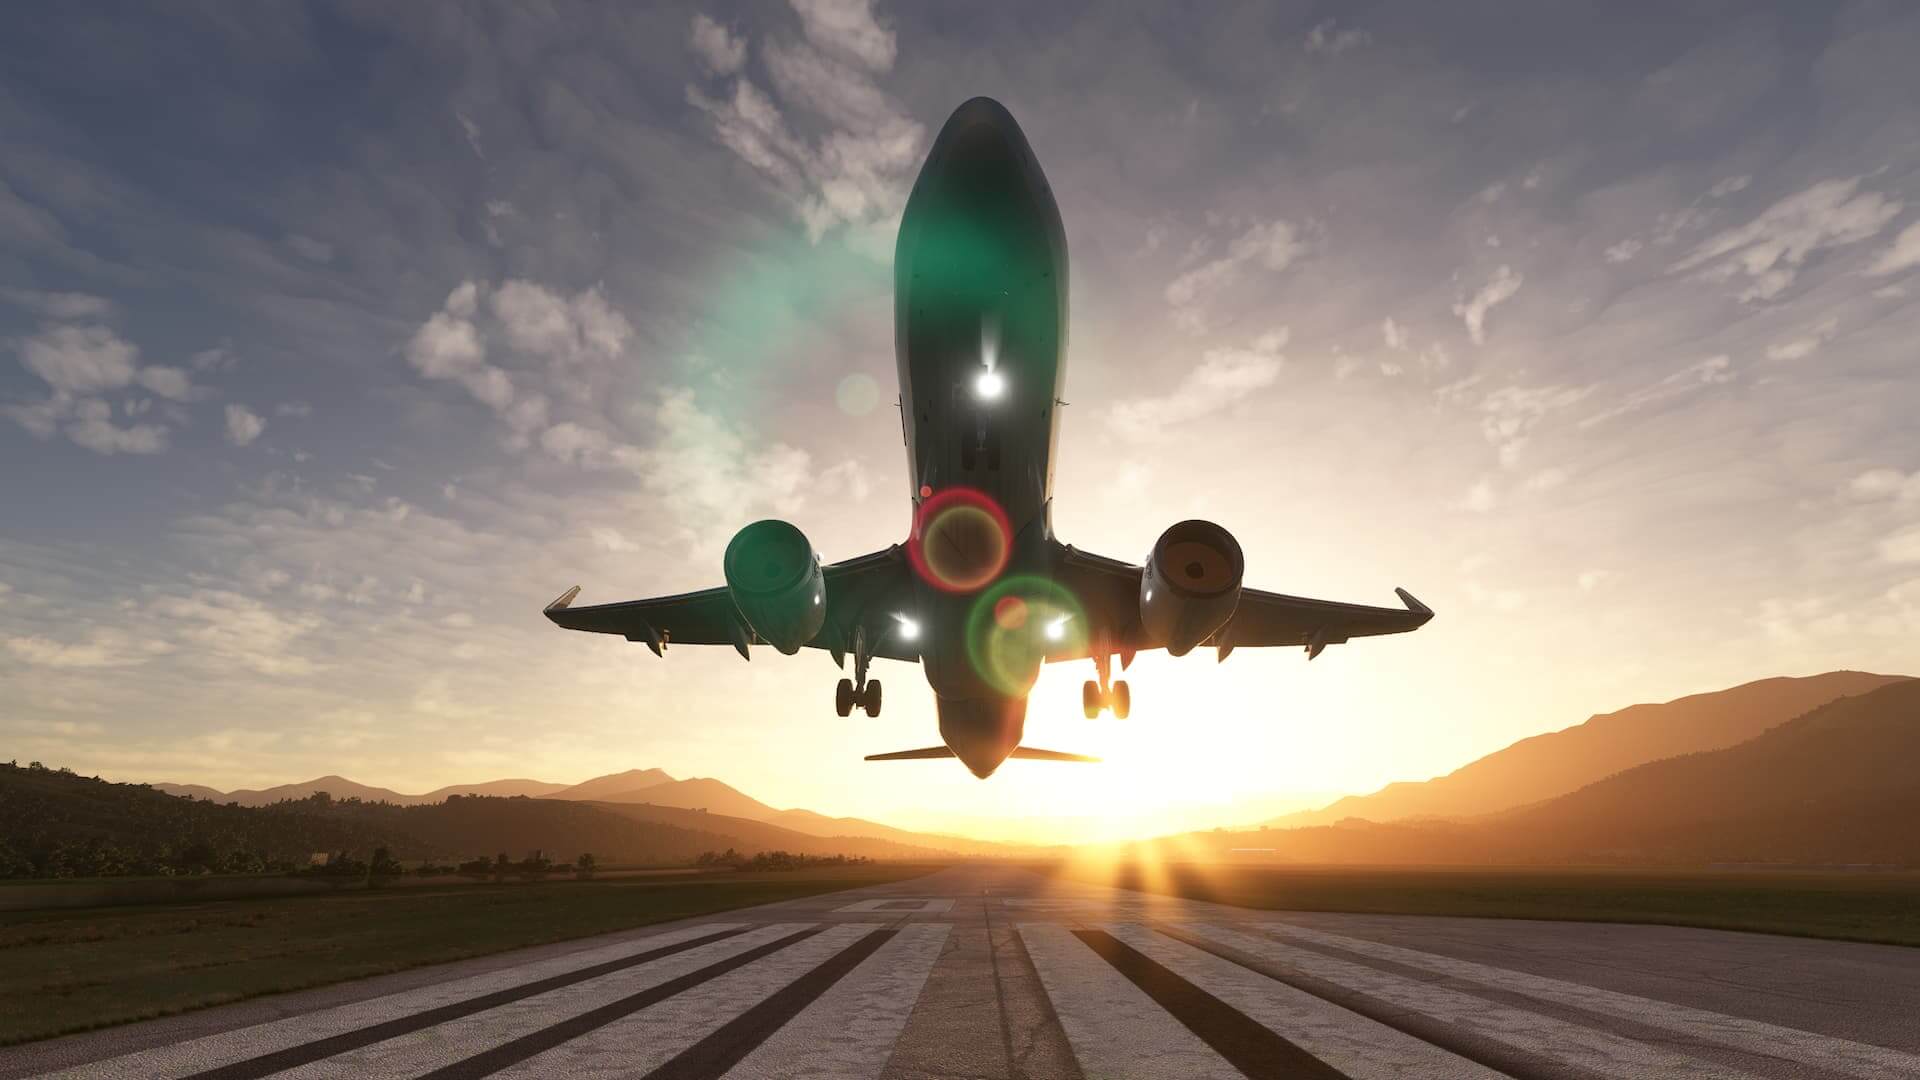 An Airbus A320 takes off with sun behind.